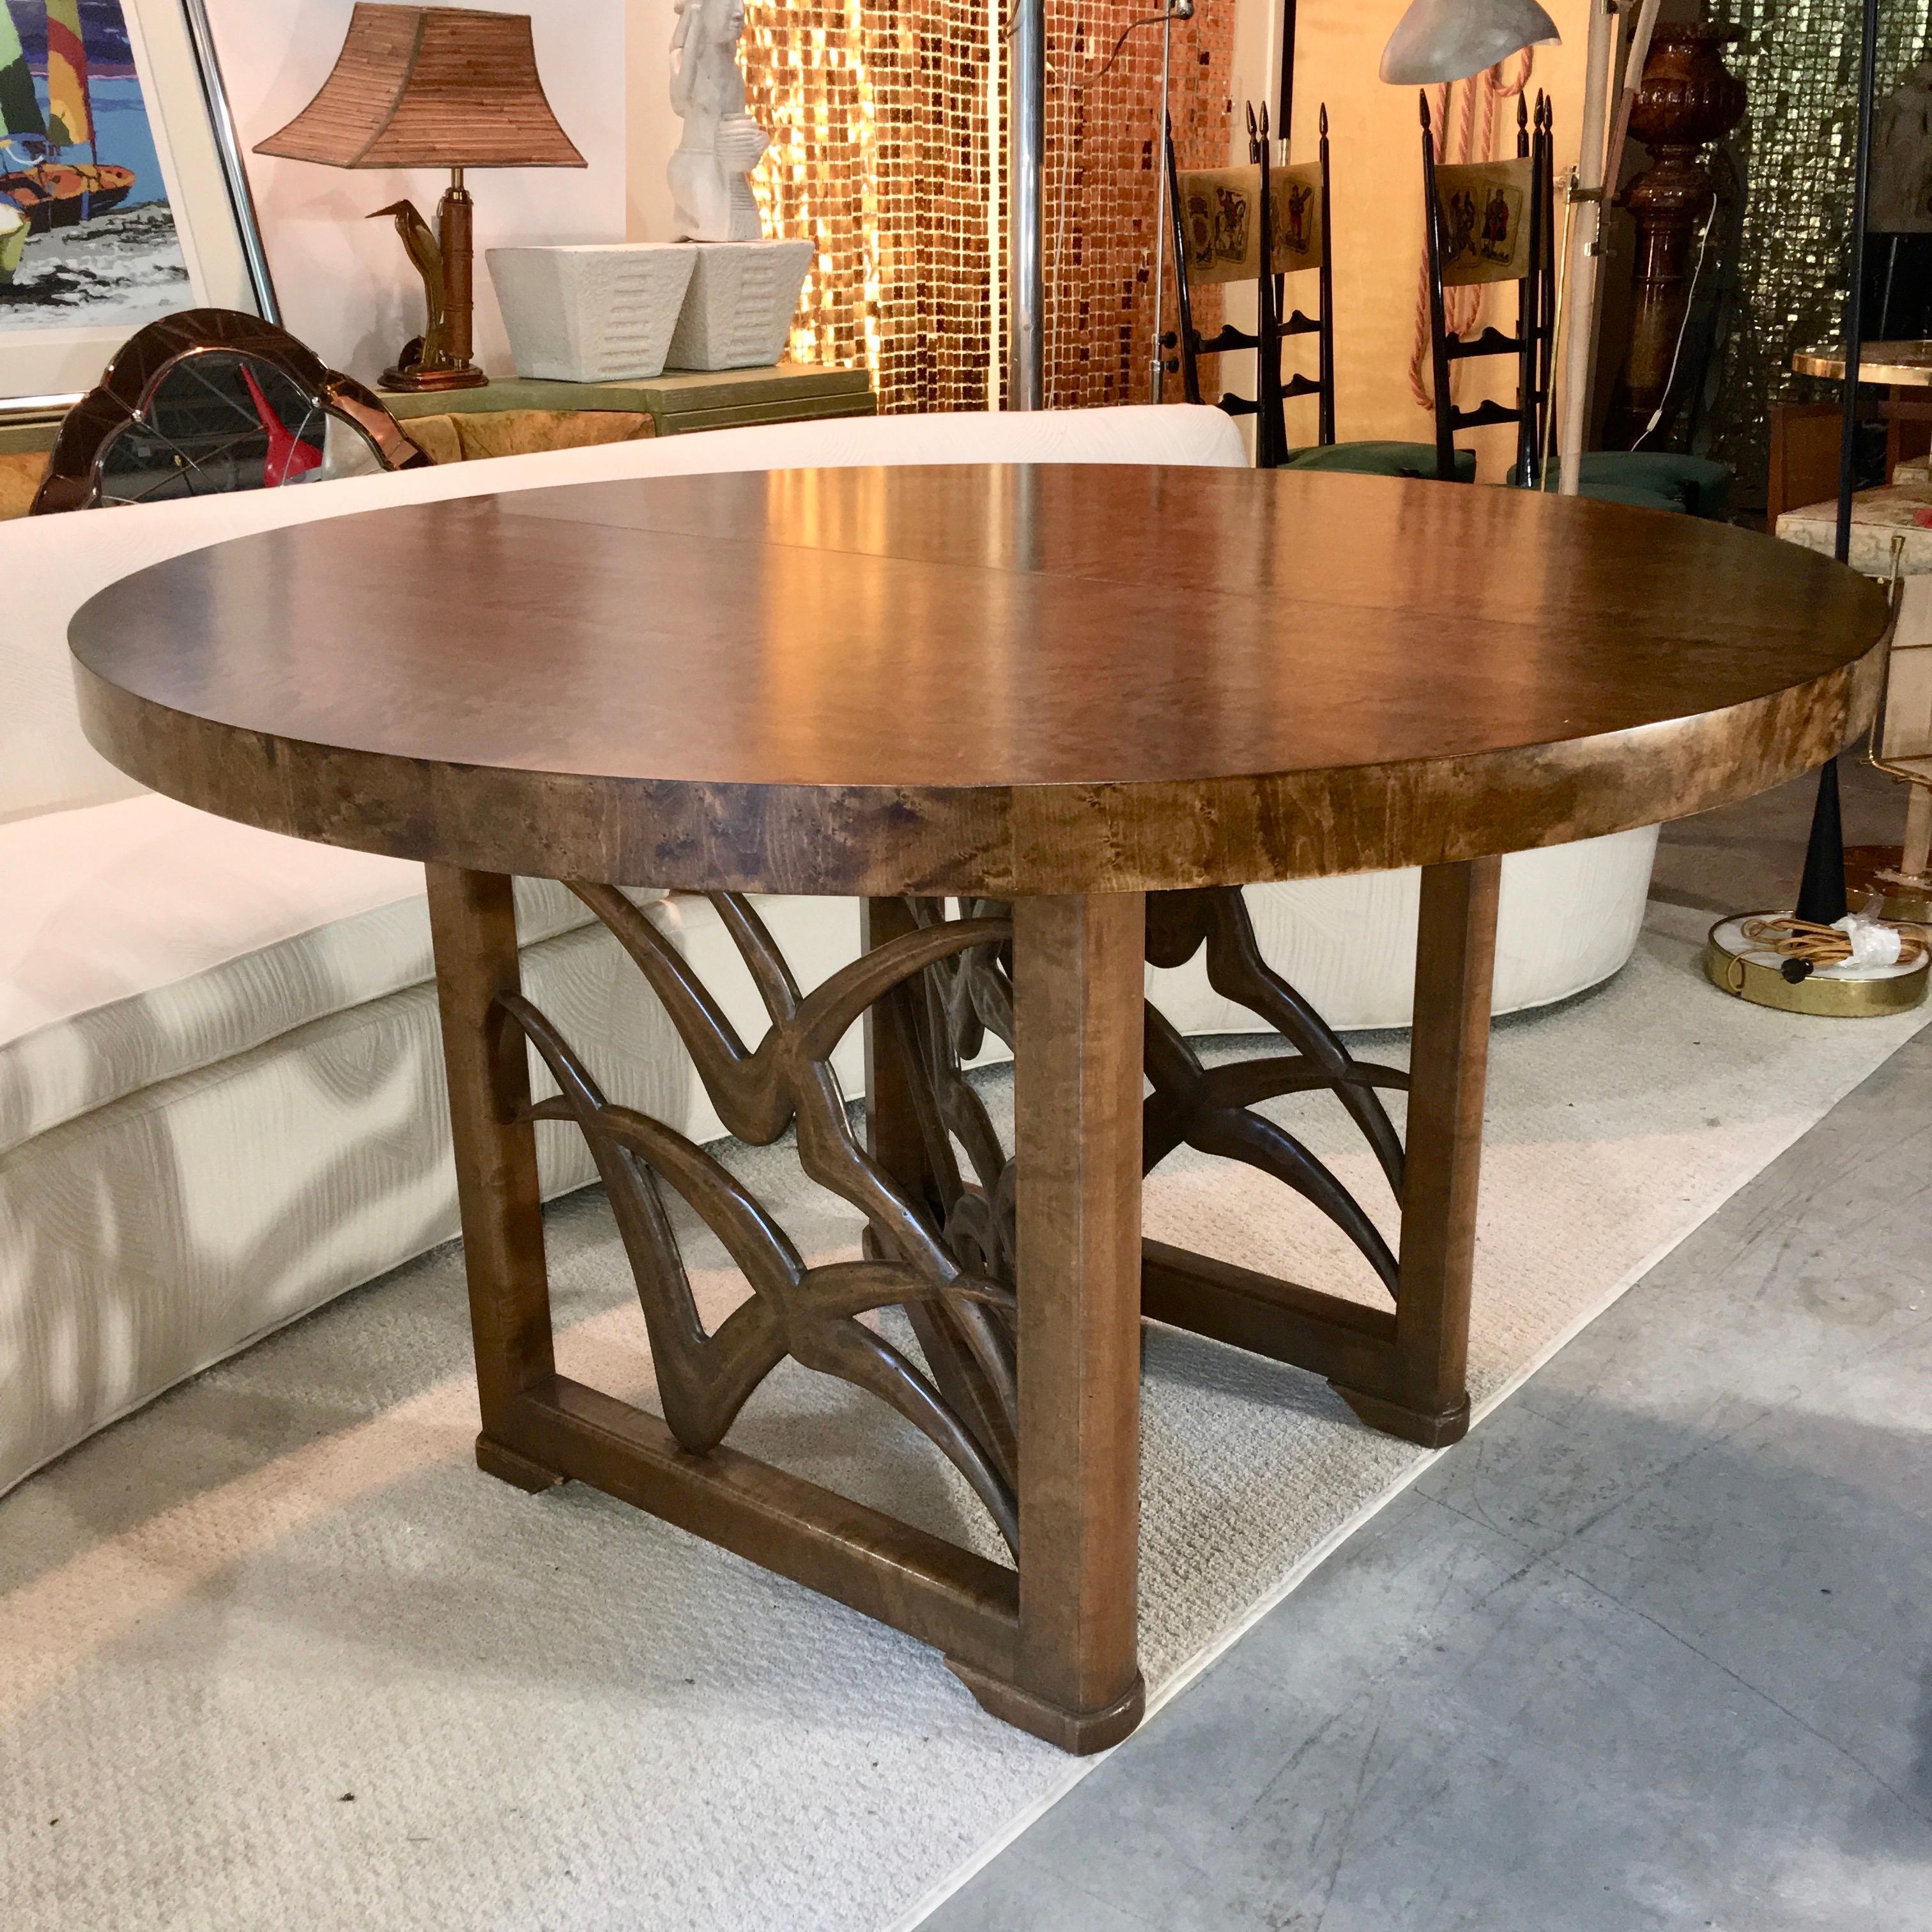 Italian American modernist design expandable round dining table by Adolfo Genovese of F. & G. Handmade Furniture Co. 121 First Street East Cambridge, MA.
This table was made late 1940s-early 1950s.
The base is a walnut N- or Z- form frame of three